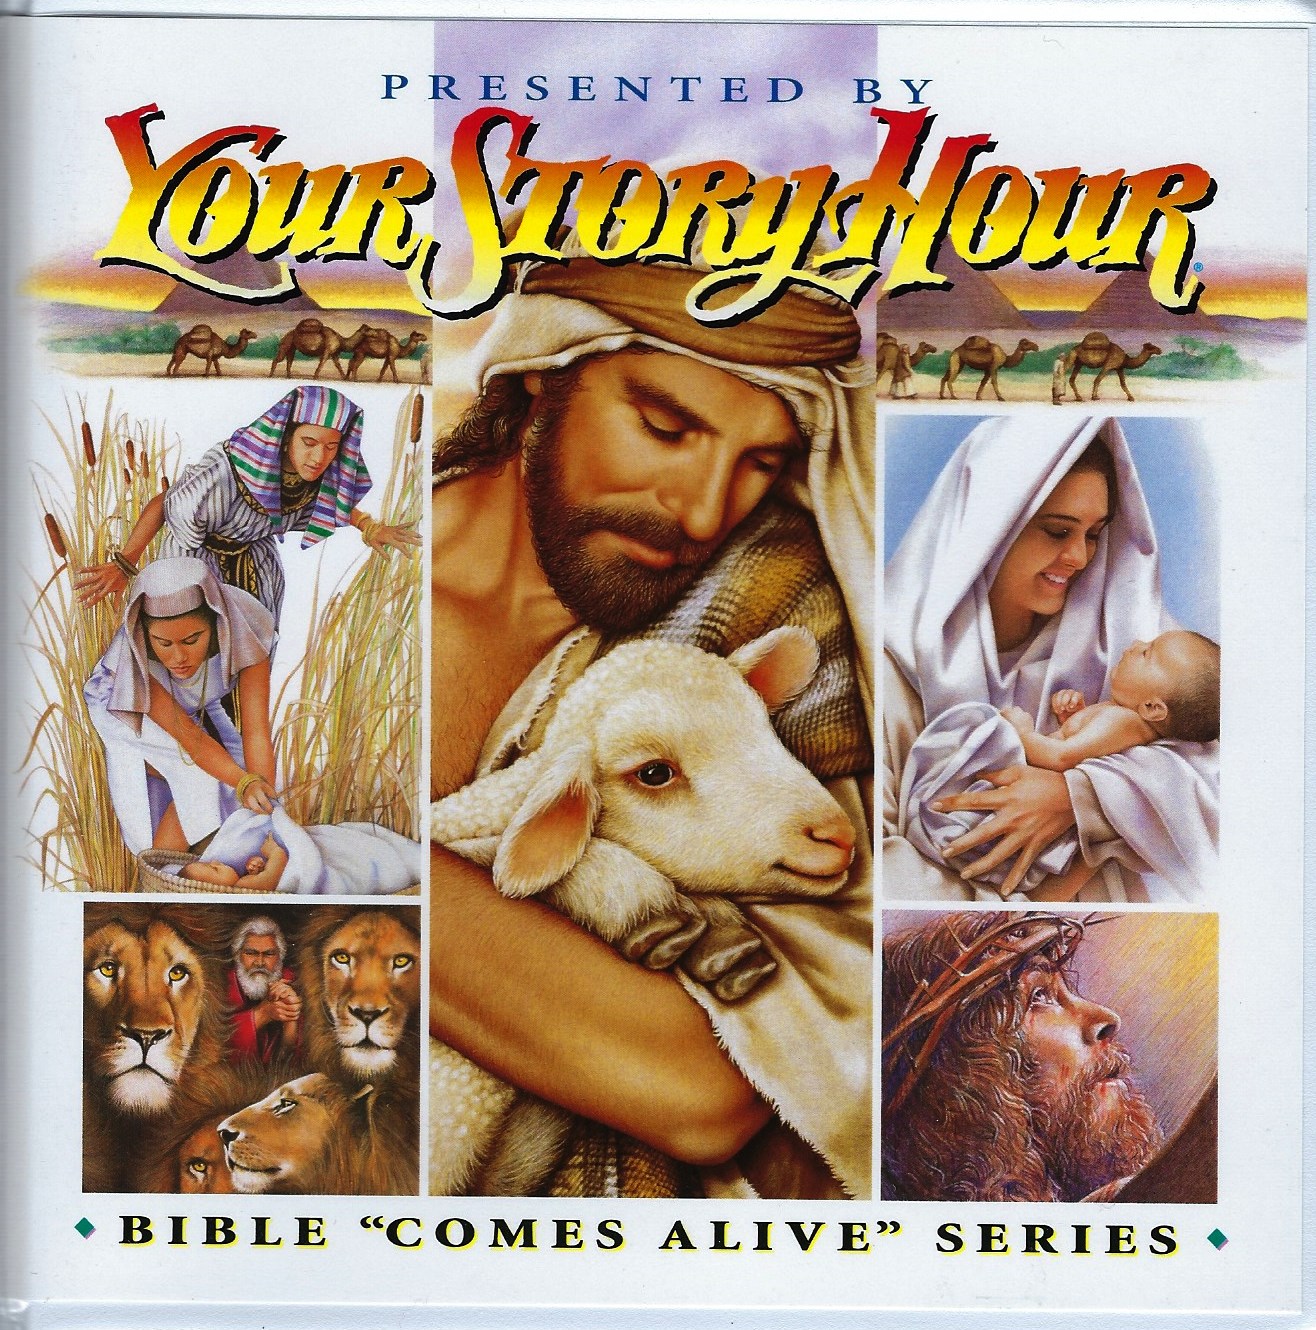 BIBLE COMES ALIVE SERIES CD ALBUM 5 Your Story Hour